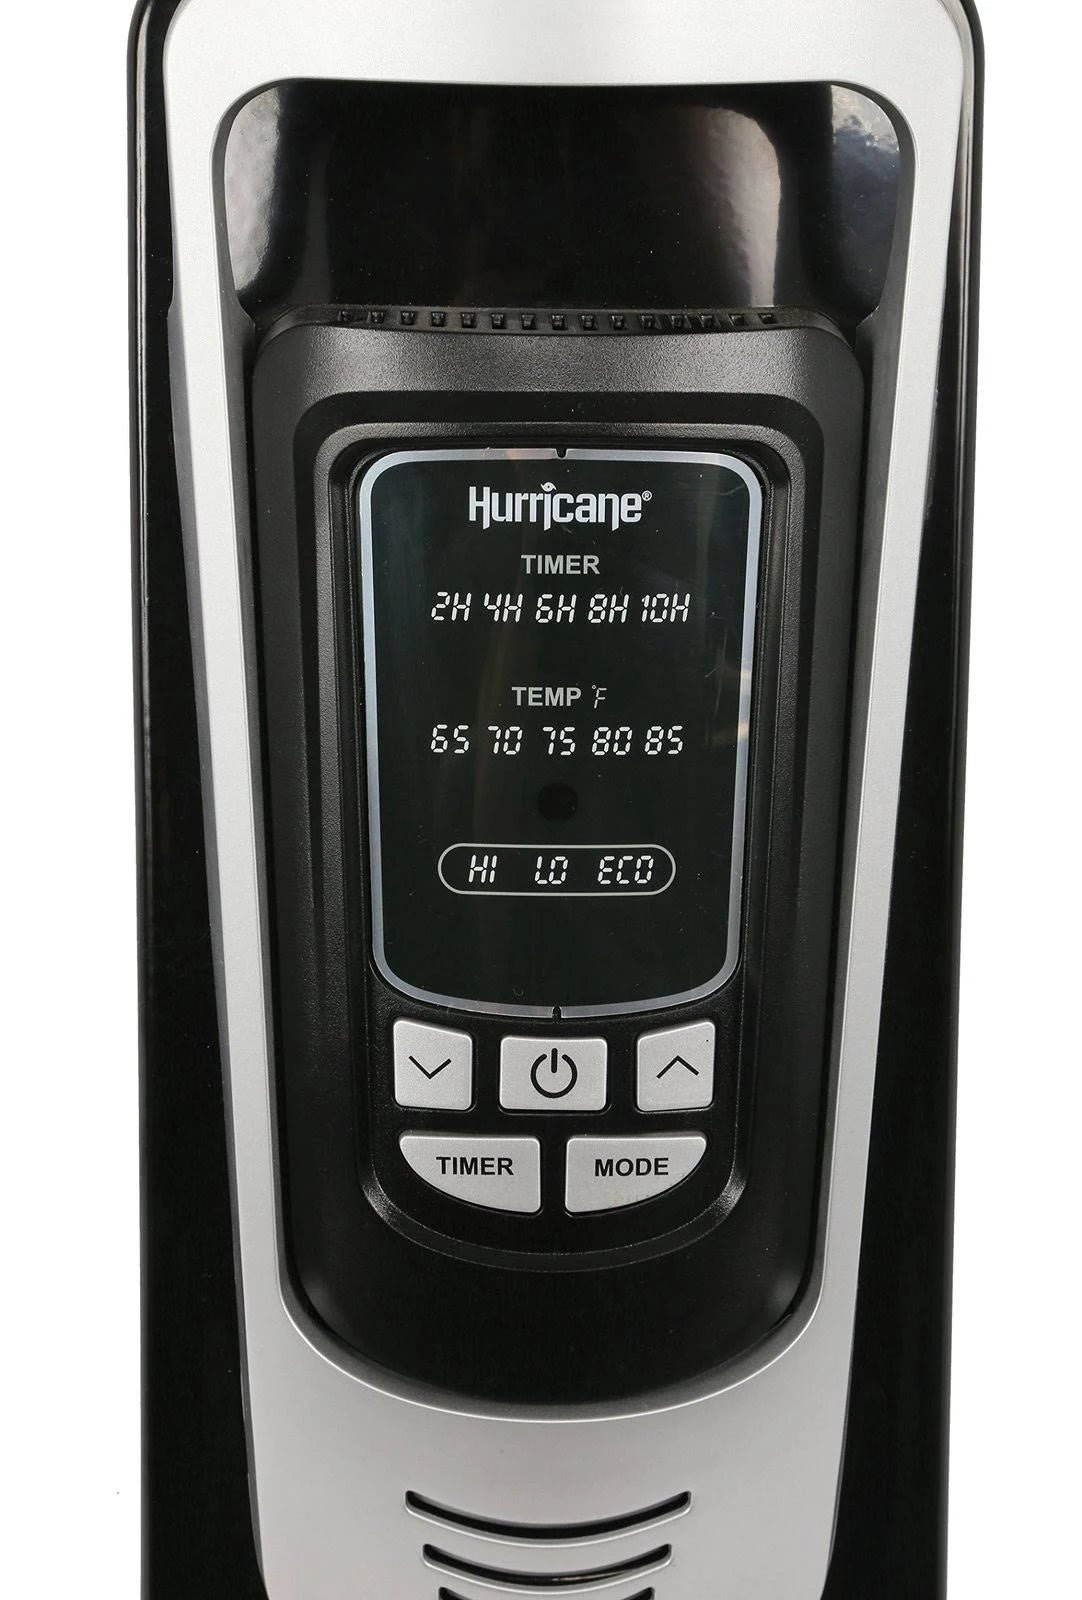 Hurricane Heatwave Oil-Filled Whole Room Radiant Heater with Digital Display and Remote - 1500W